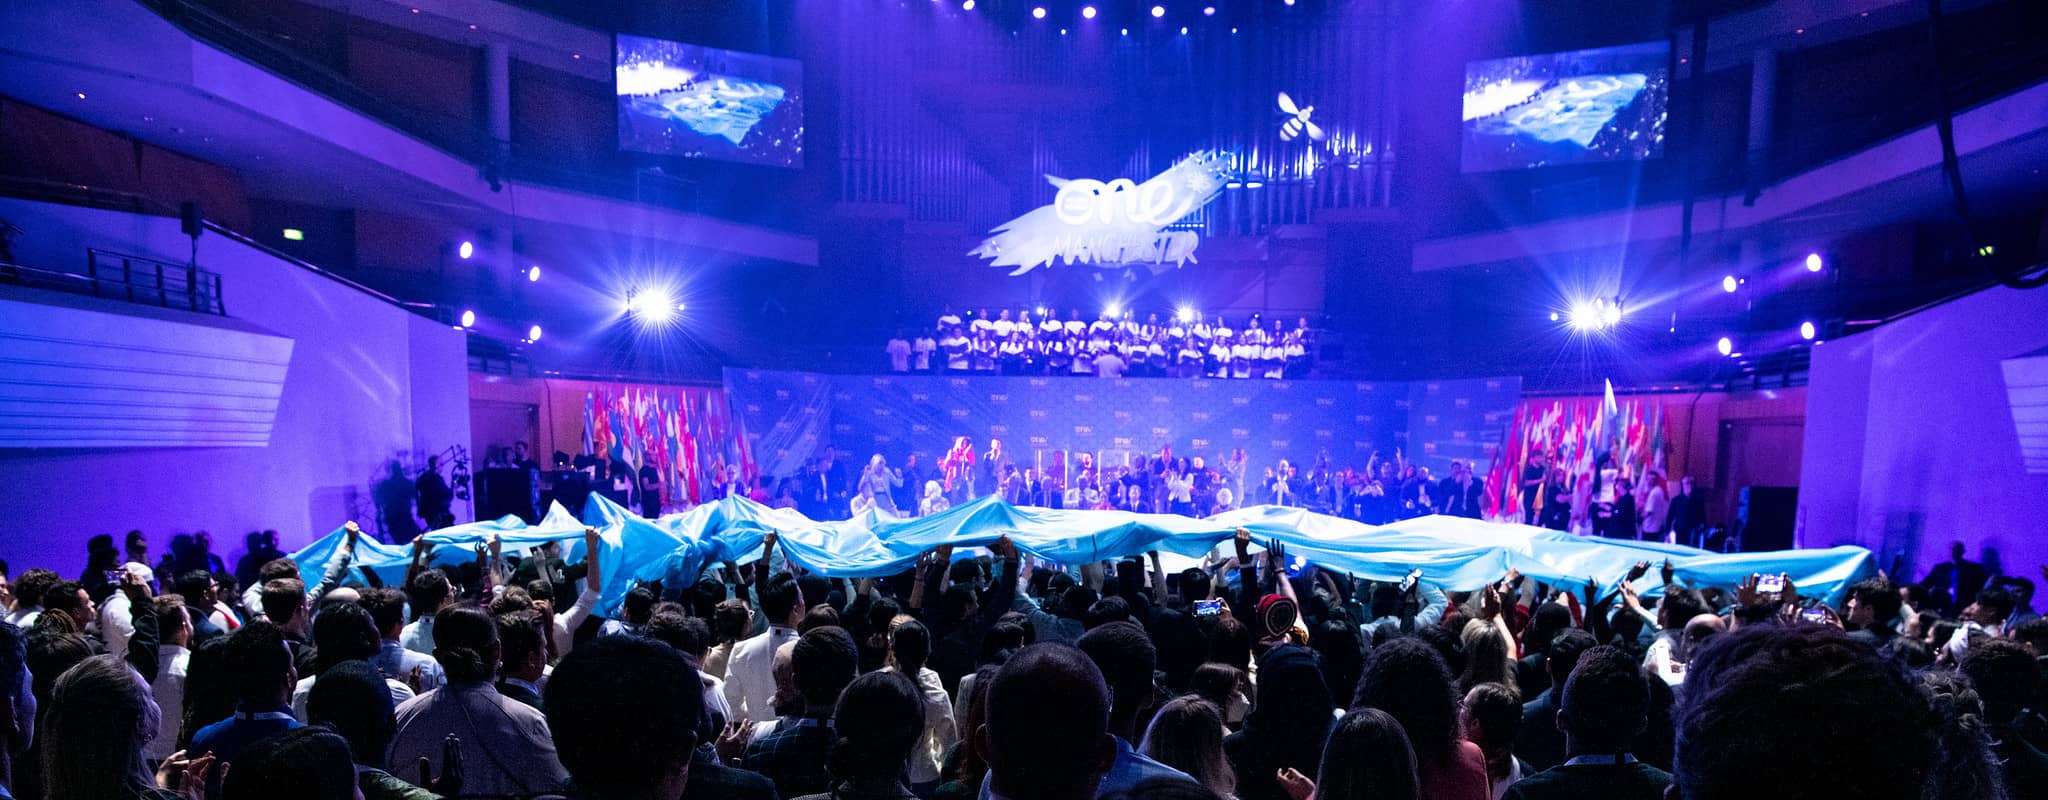 OYW banner passing over delegate audience crowd in front of the presentation stage at Manchester 2022 Summit